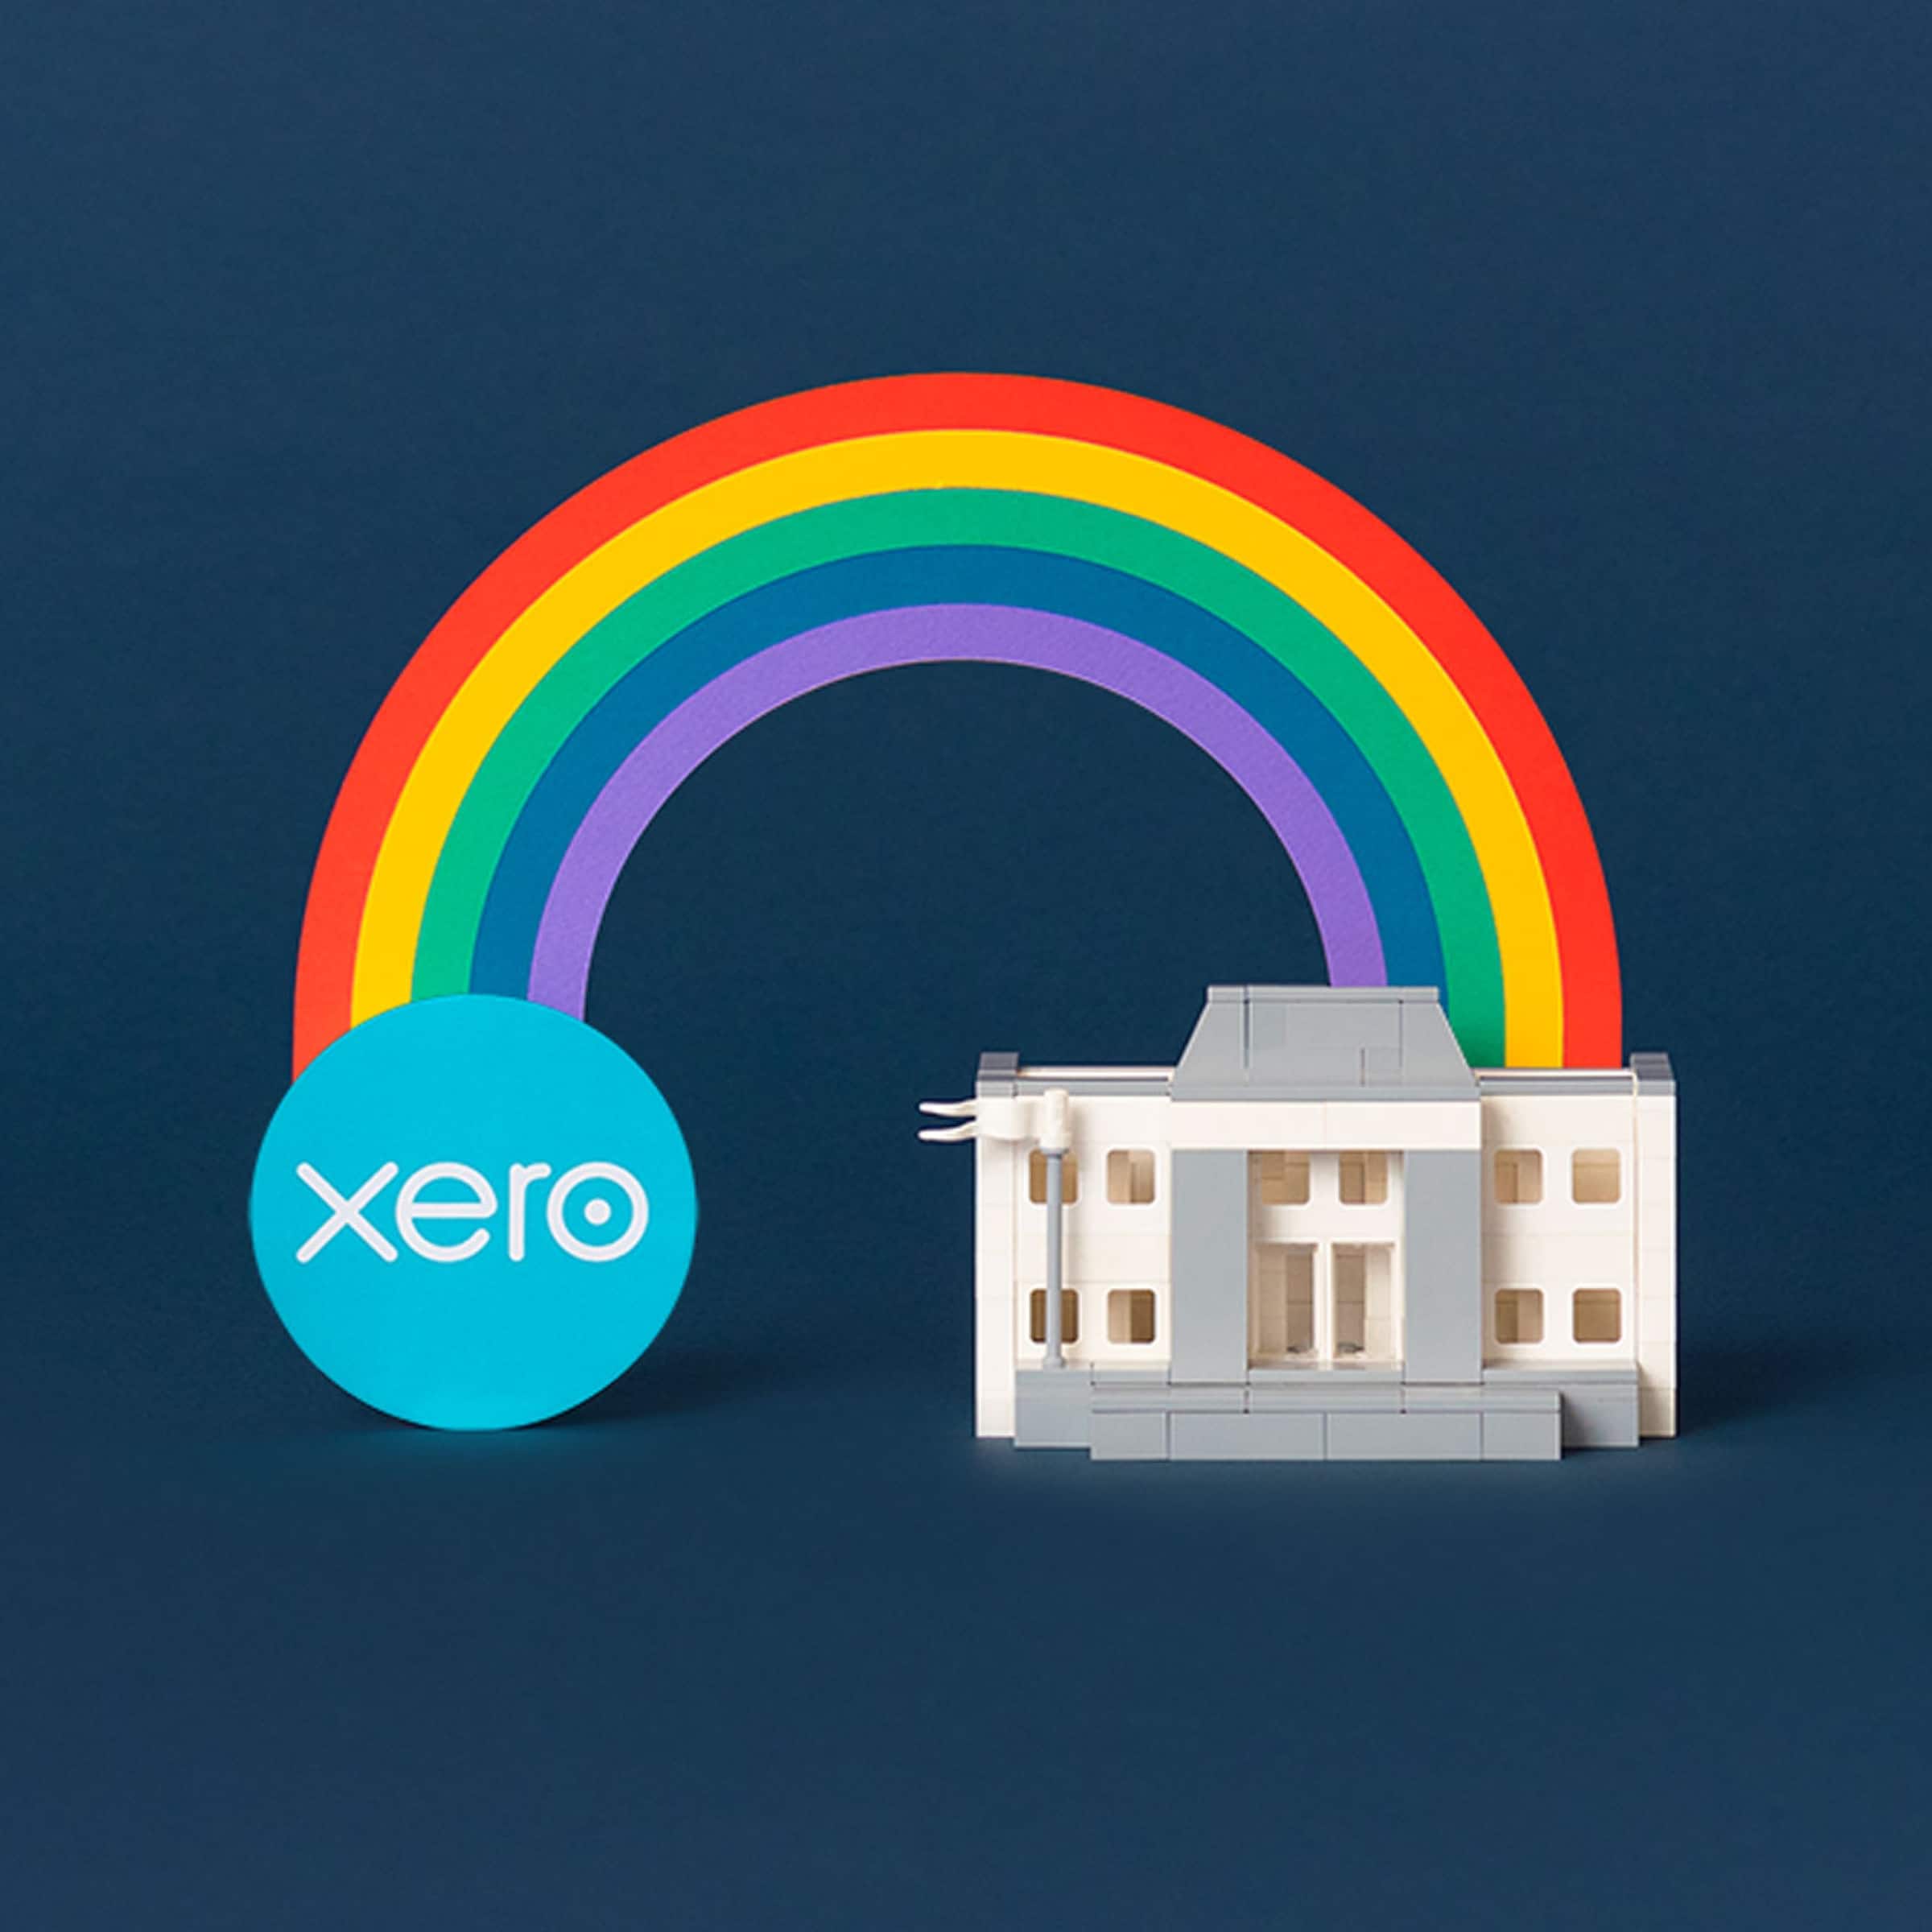 A semi-circular rainbow arches between an old-style bank building and the Xero logo.